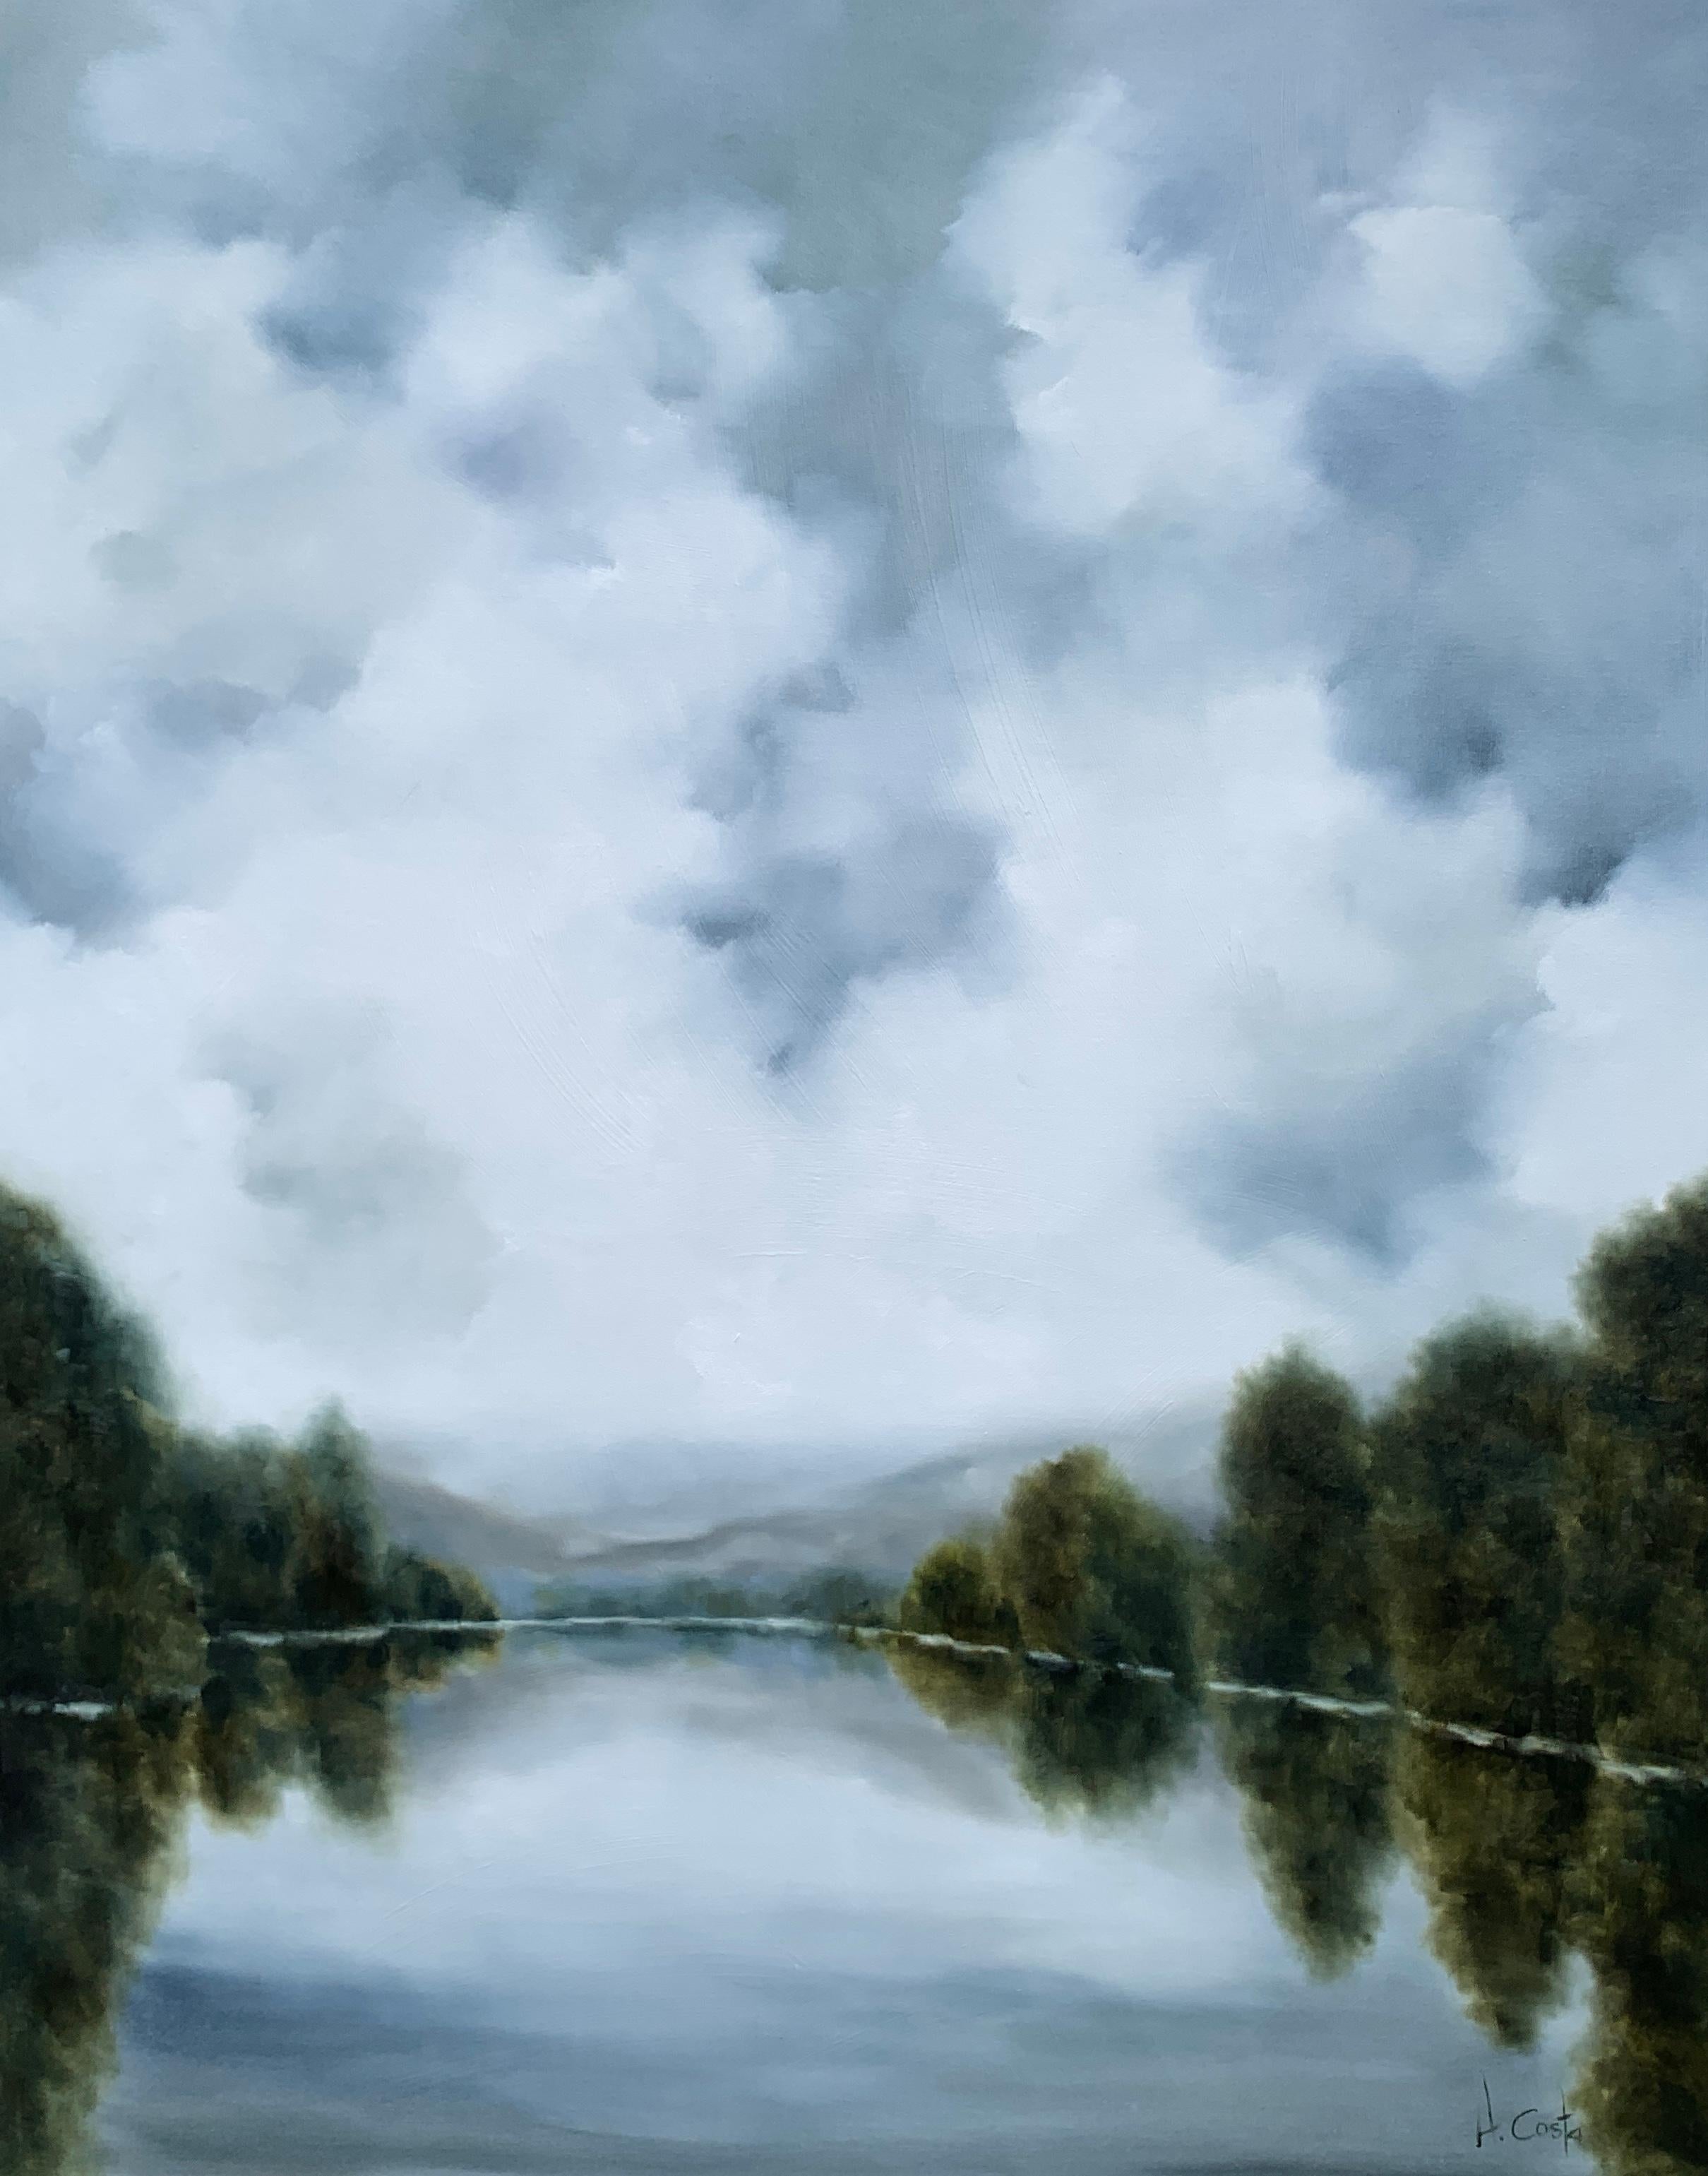 'Silver Lake' is a large Impressionist oil on gessoed canvas landscape painting created by American artist Andrea Costa in 2020. Featuring a soft palette mostly made of grey, white, blue and green tones, the painting depicts a peaceful and luminous